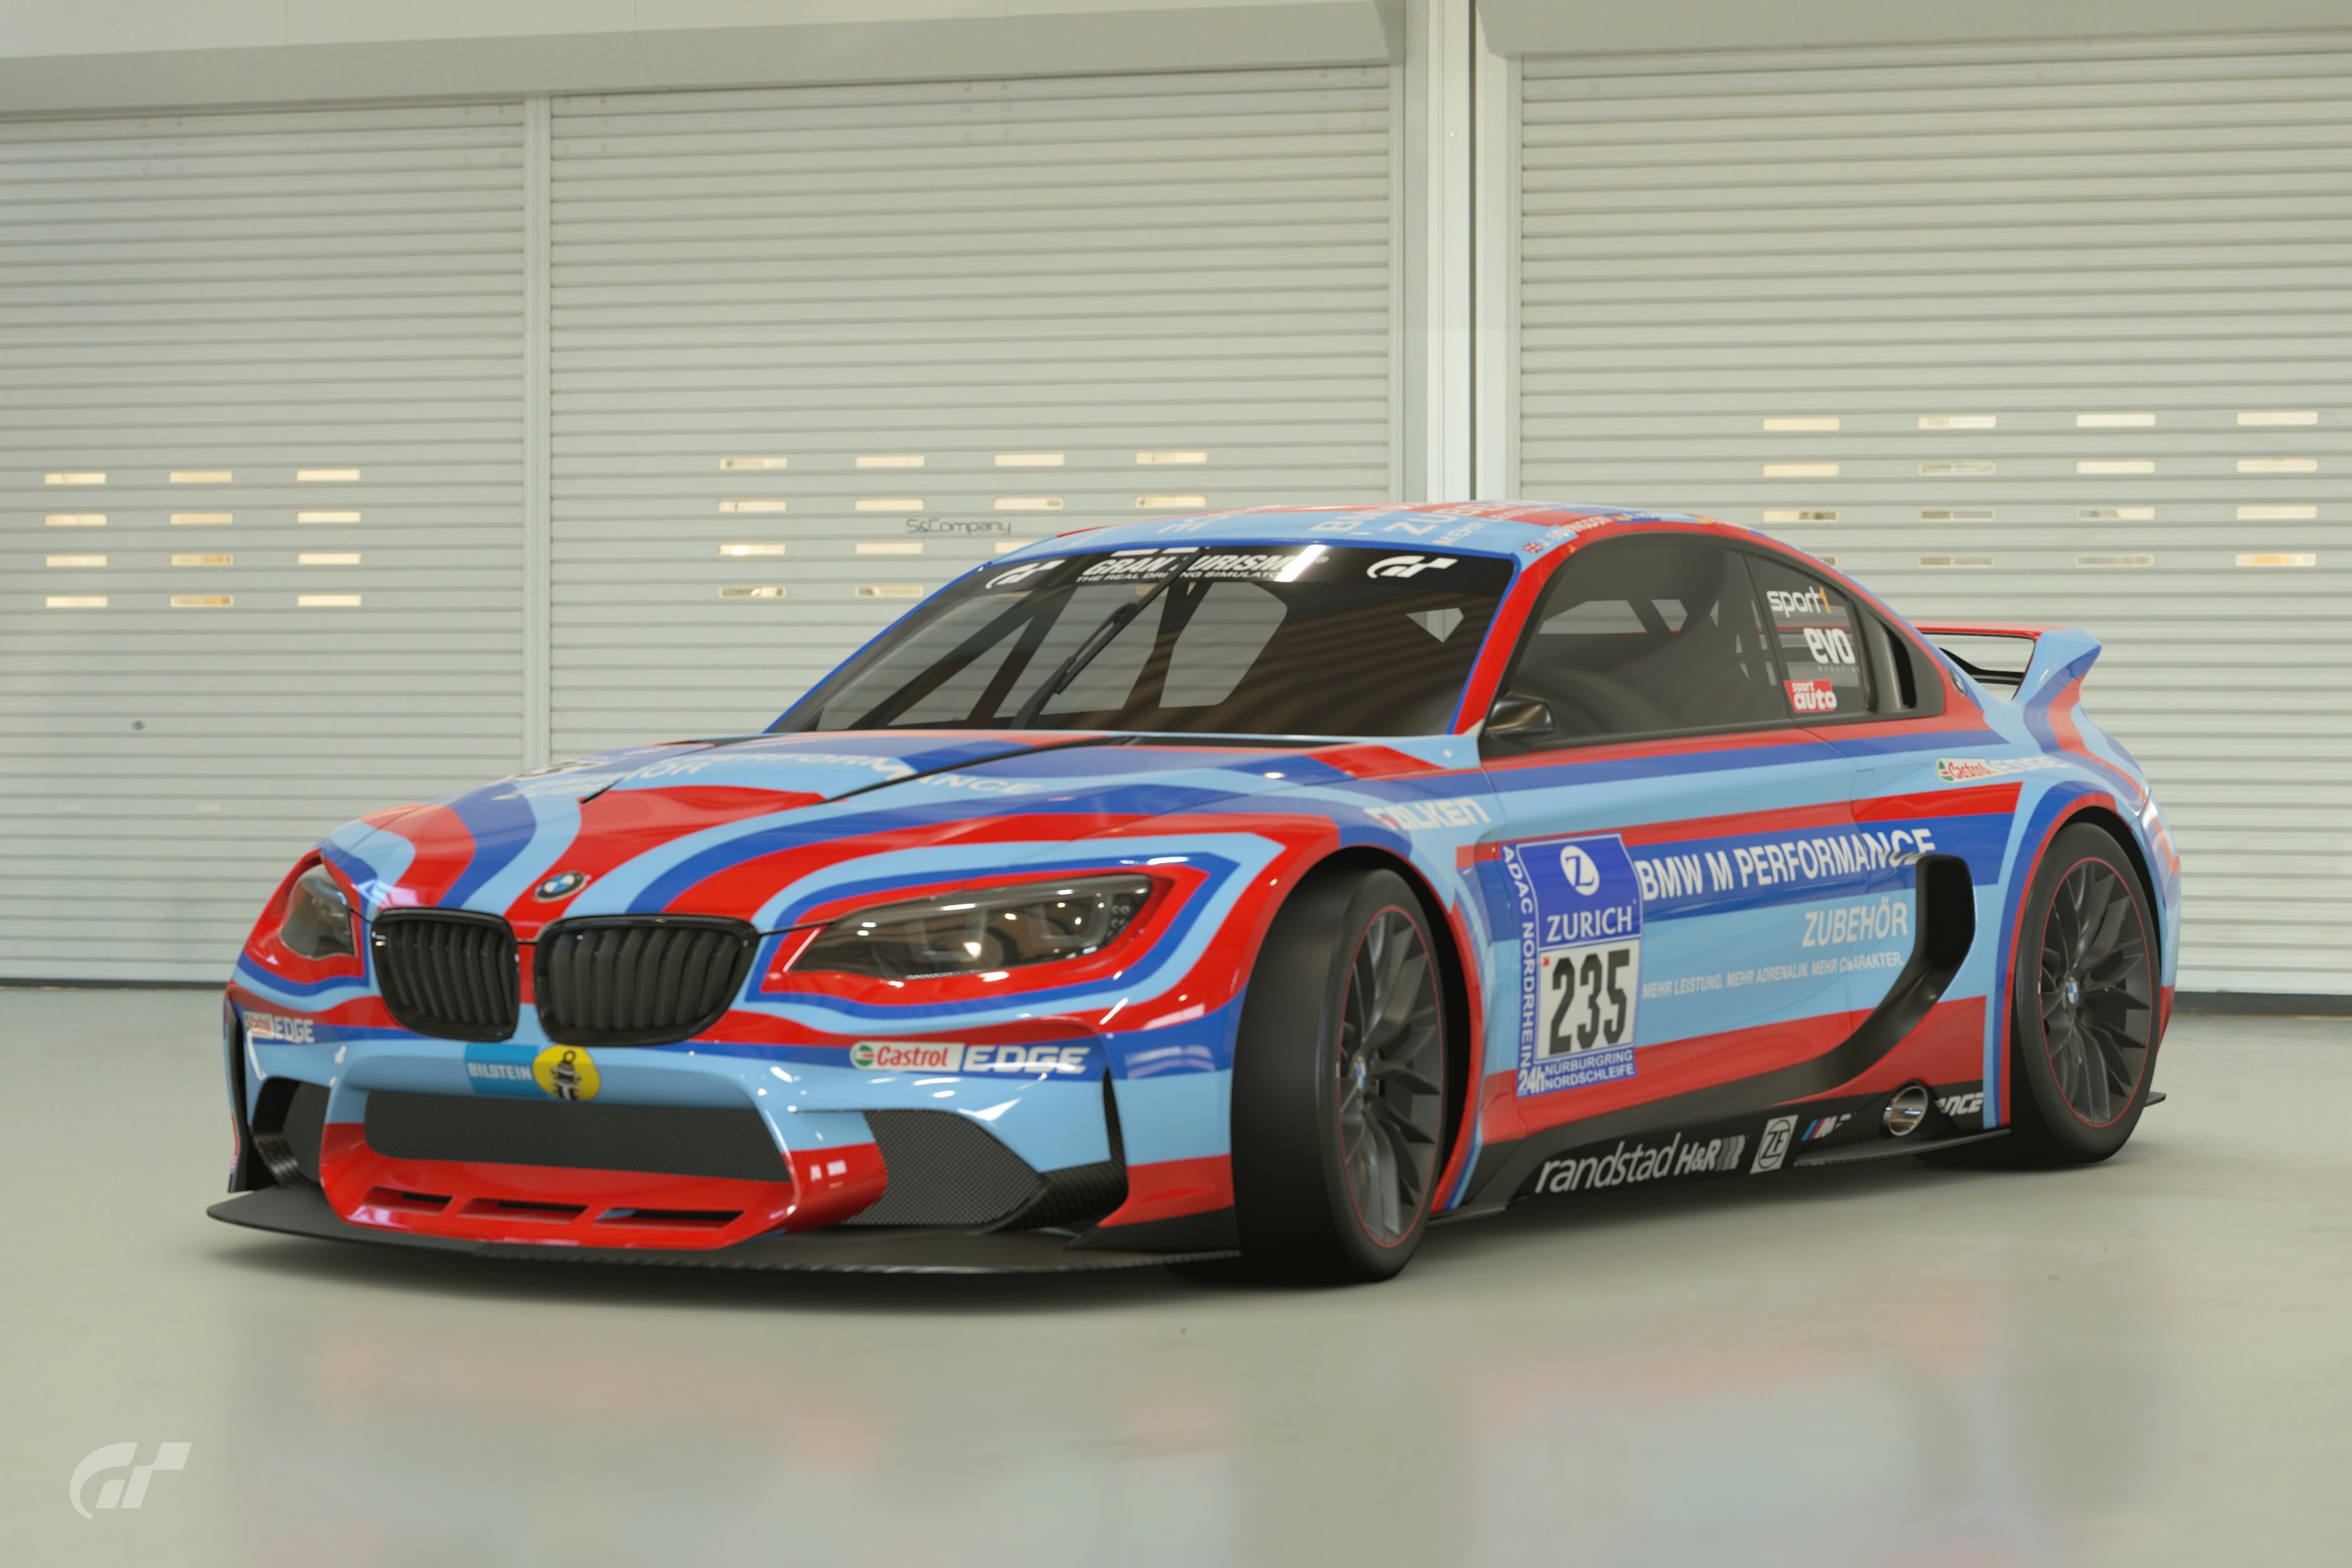 2014 24h class winning livery. Adapted from a M235i. 1